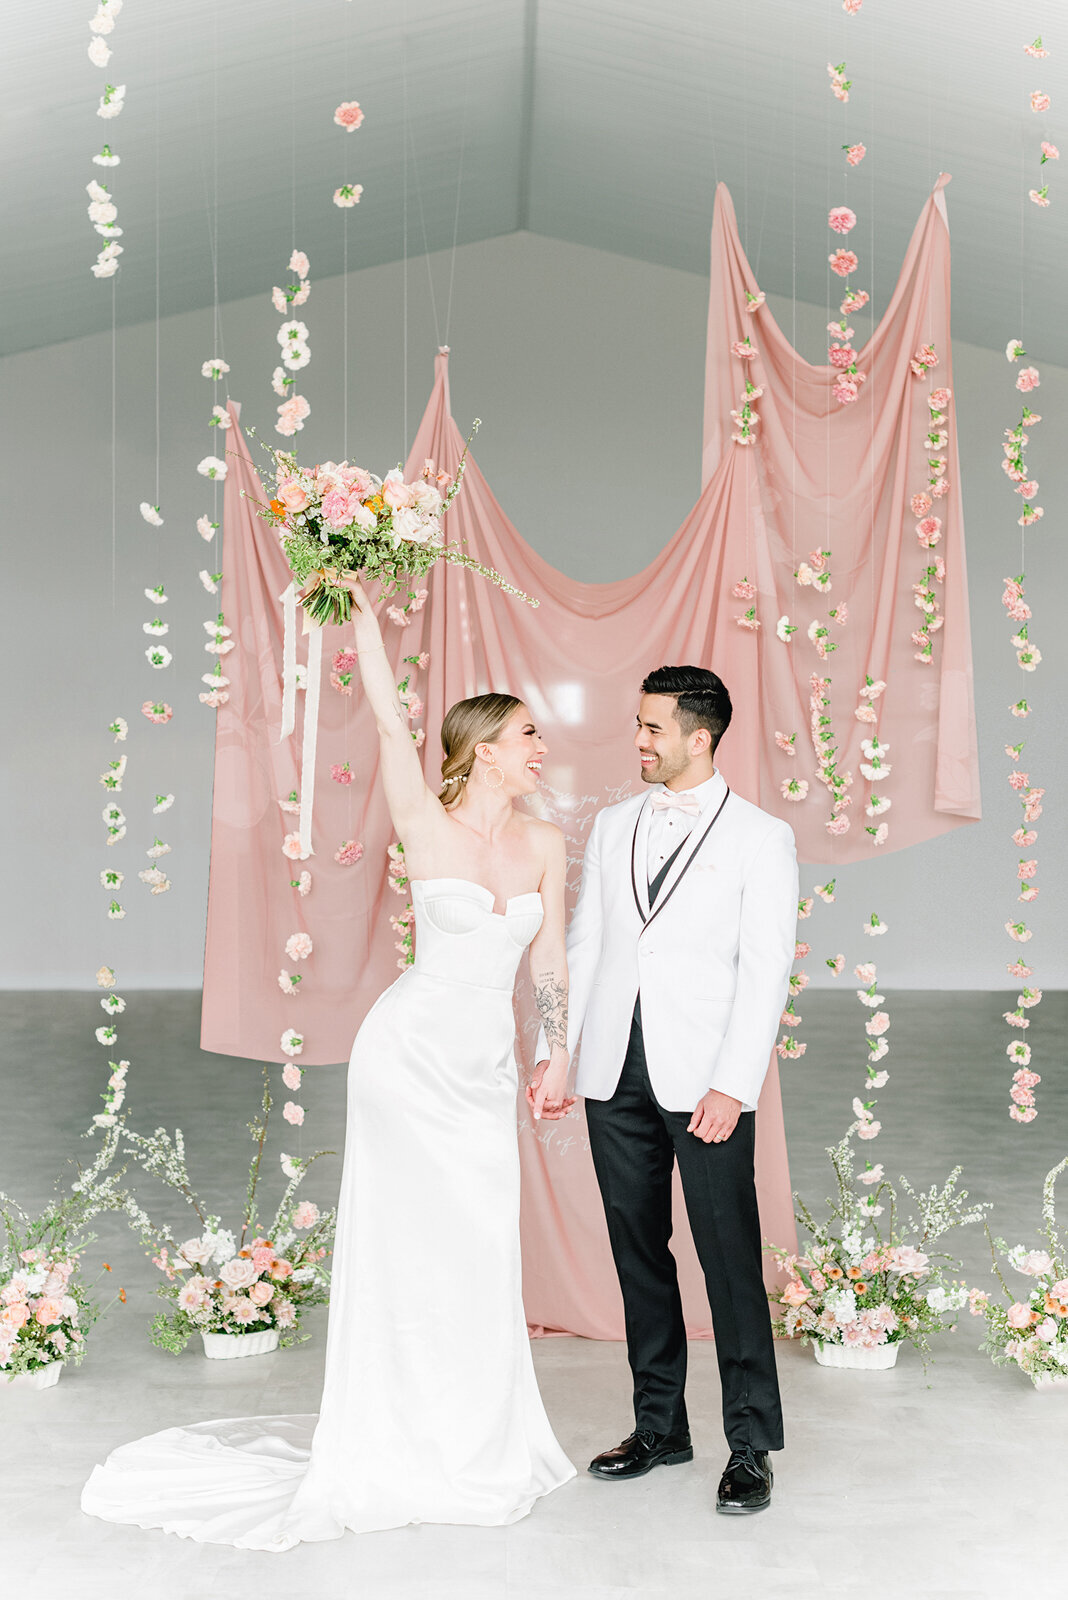 Gorgeous hanging pink florals at Tin Roof Event Centre, a modern wedding venue in Lacombe, Alberta, featured on the Brontë Bride Vendor Guide.